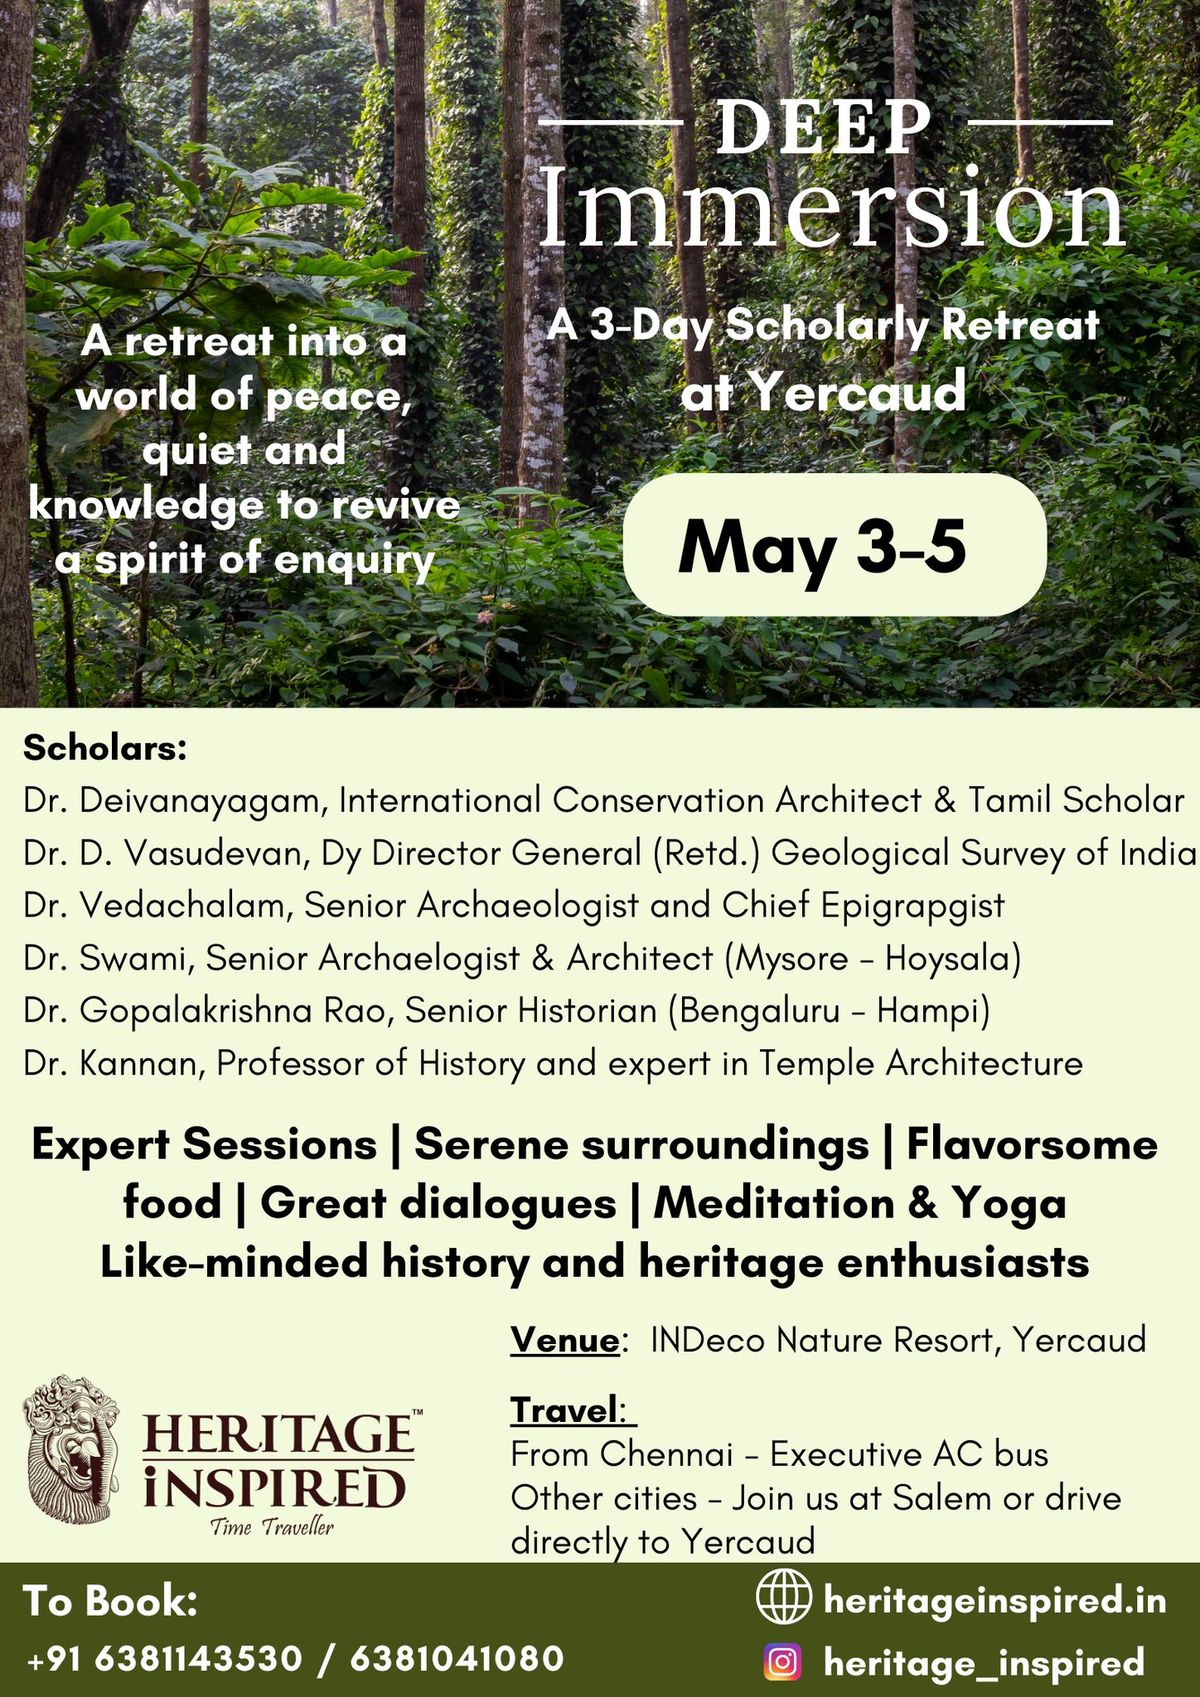 Deep Immersion (A Scholarly Retreat at Yercaud)